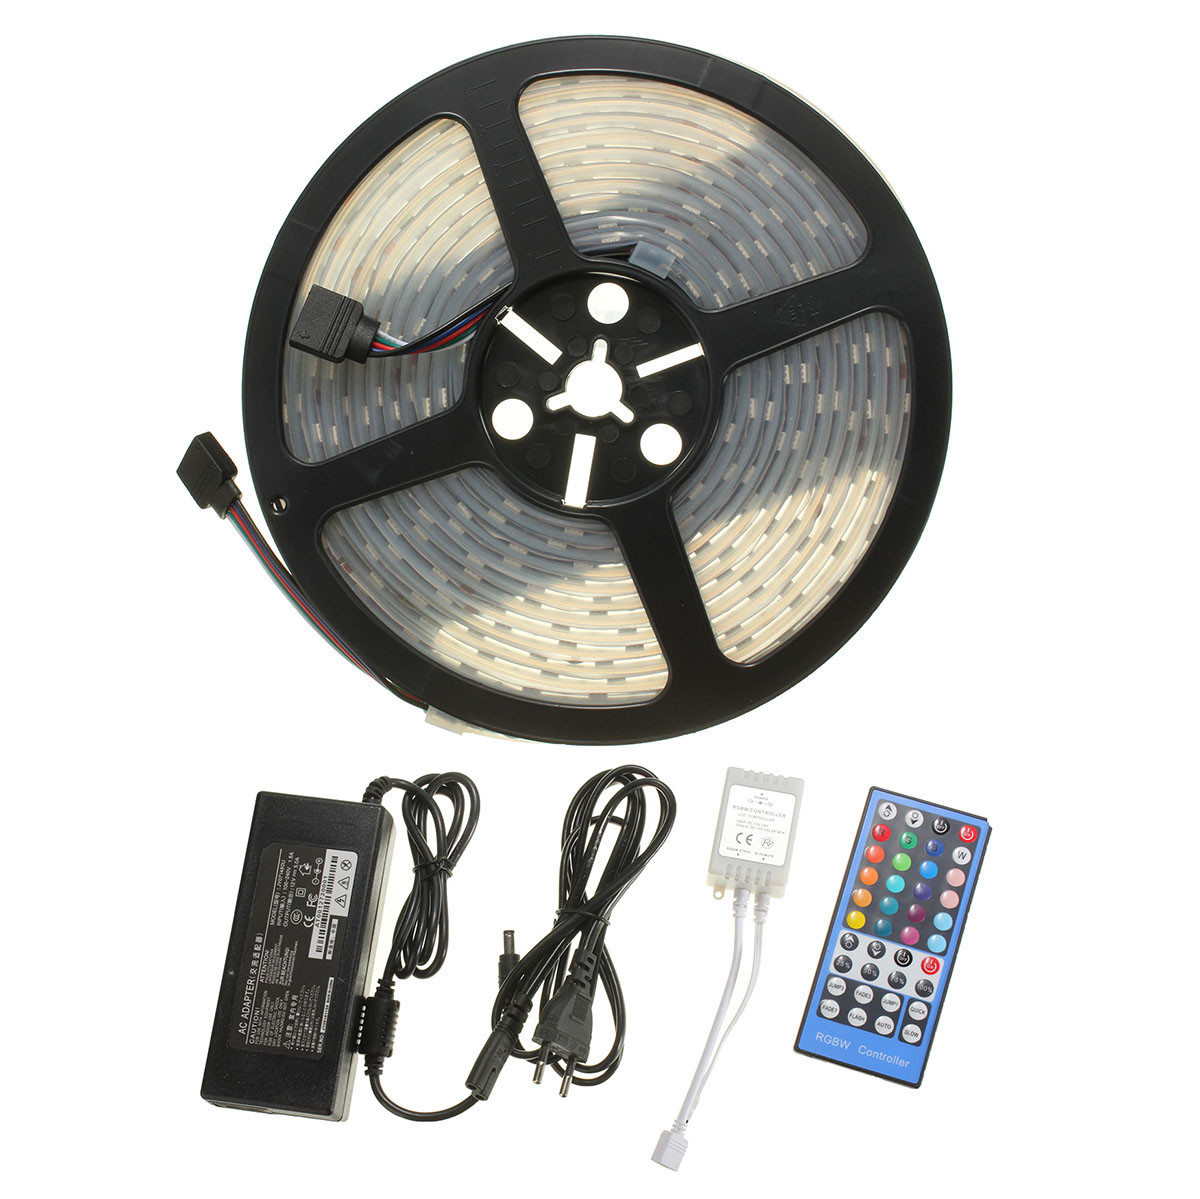 Find 5M 300LED RGB Warm White Flexible RGBW LED Strip Kit with 40 Key Remote Control for Sale on Gipsybee.com with cryptocurrencies